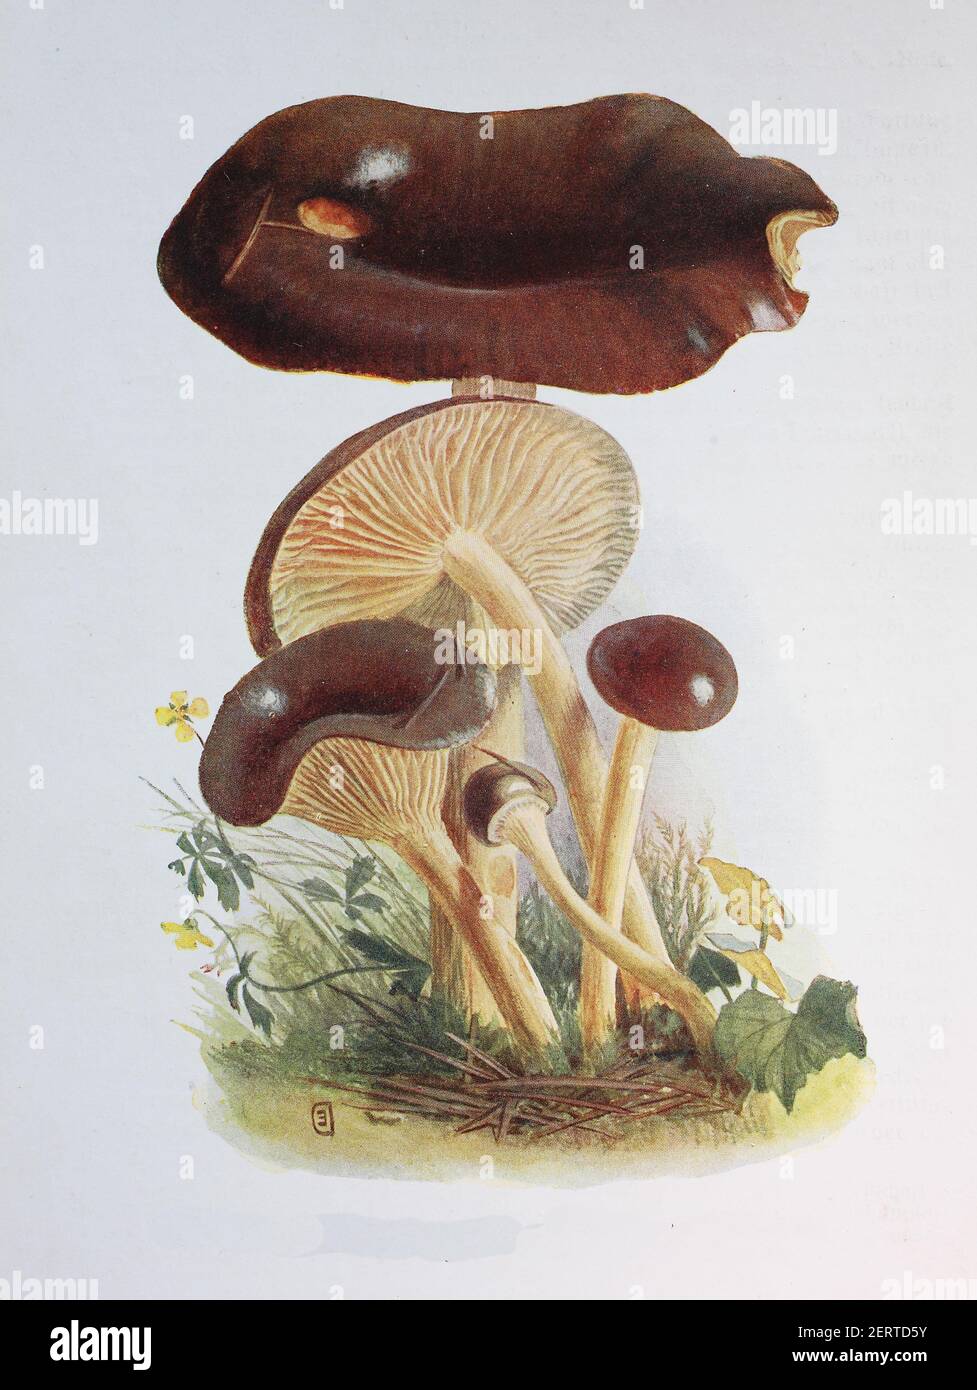 Hygrophorus hypothejus, commonly known as herald of the winter, digital reproduction of an ilustration of Emil Doerstling (1859-1940) Stock Photo